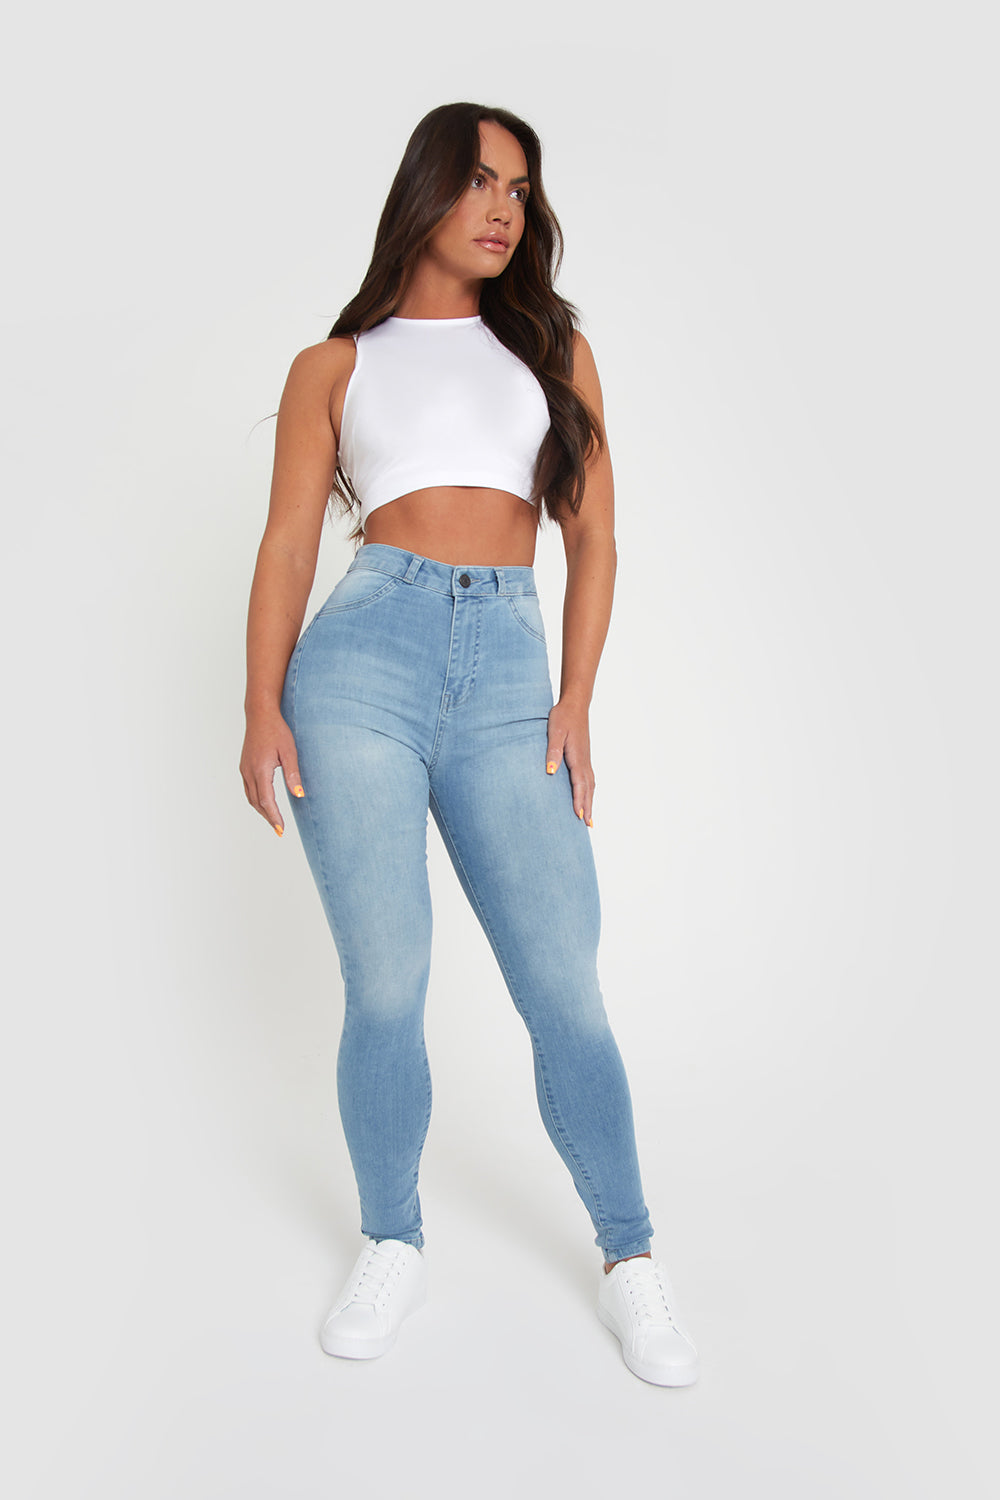 Womens High Waisted Jeans - Buy High Waisted Jeans For Women